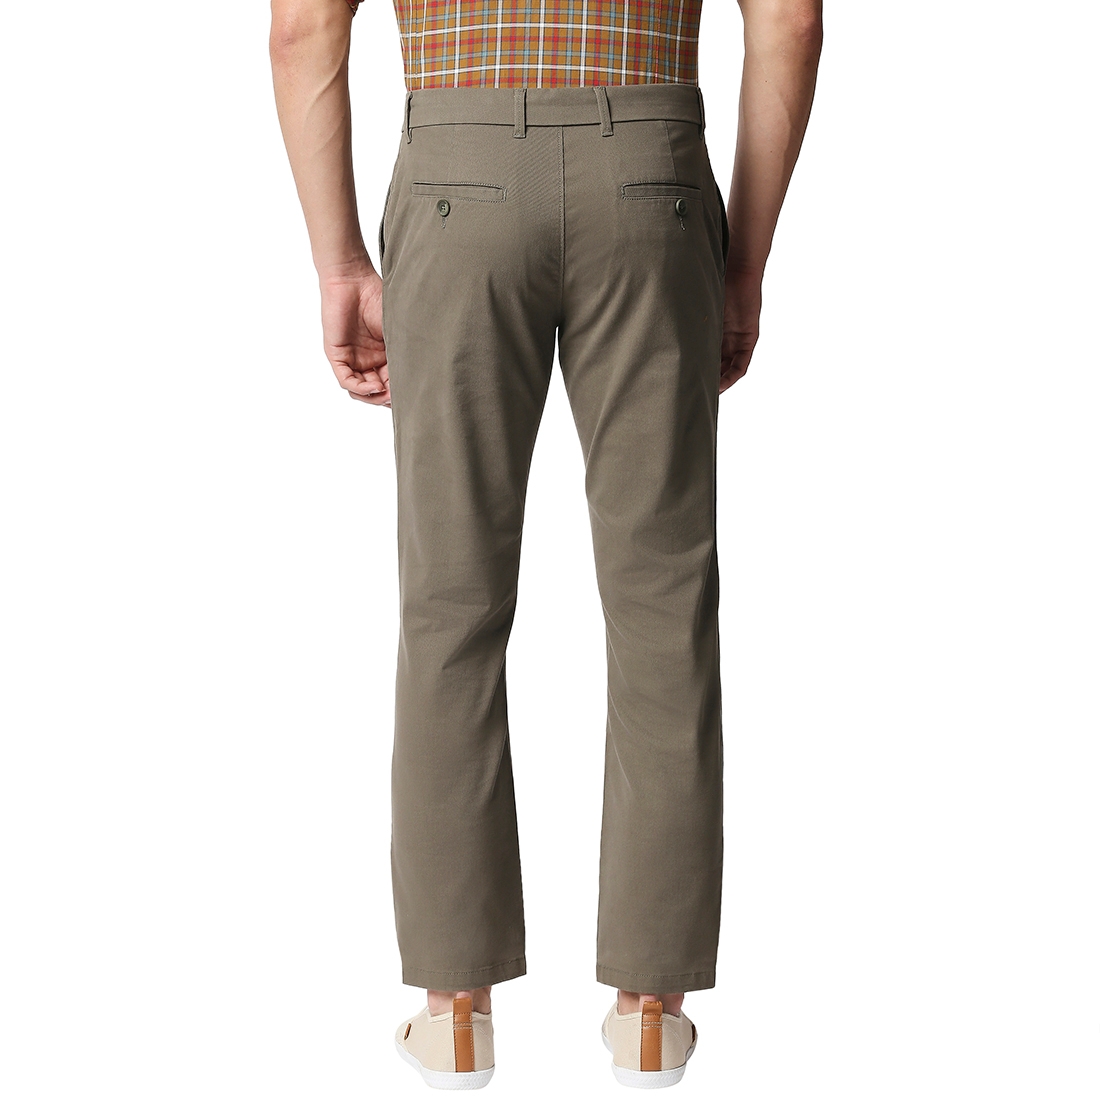 Basics | BASICS CASUAL PLAIN OLIVE COTTON STRETCH TAPERED TROUSERS  1